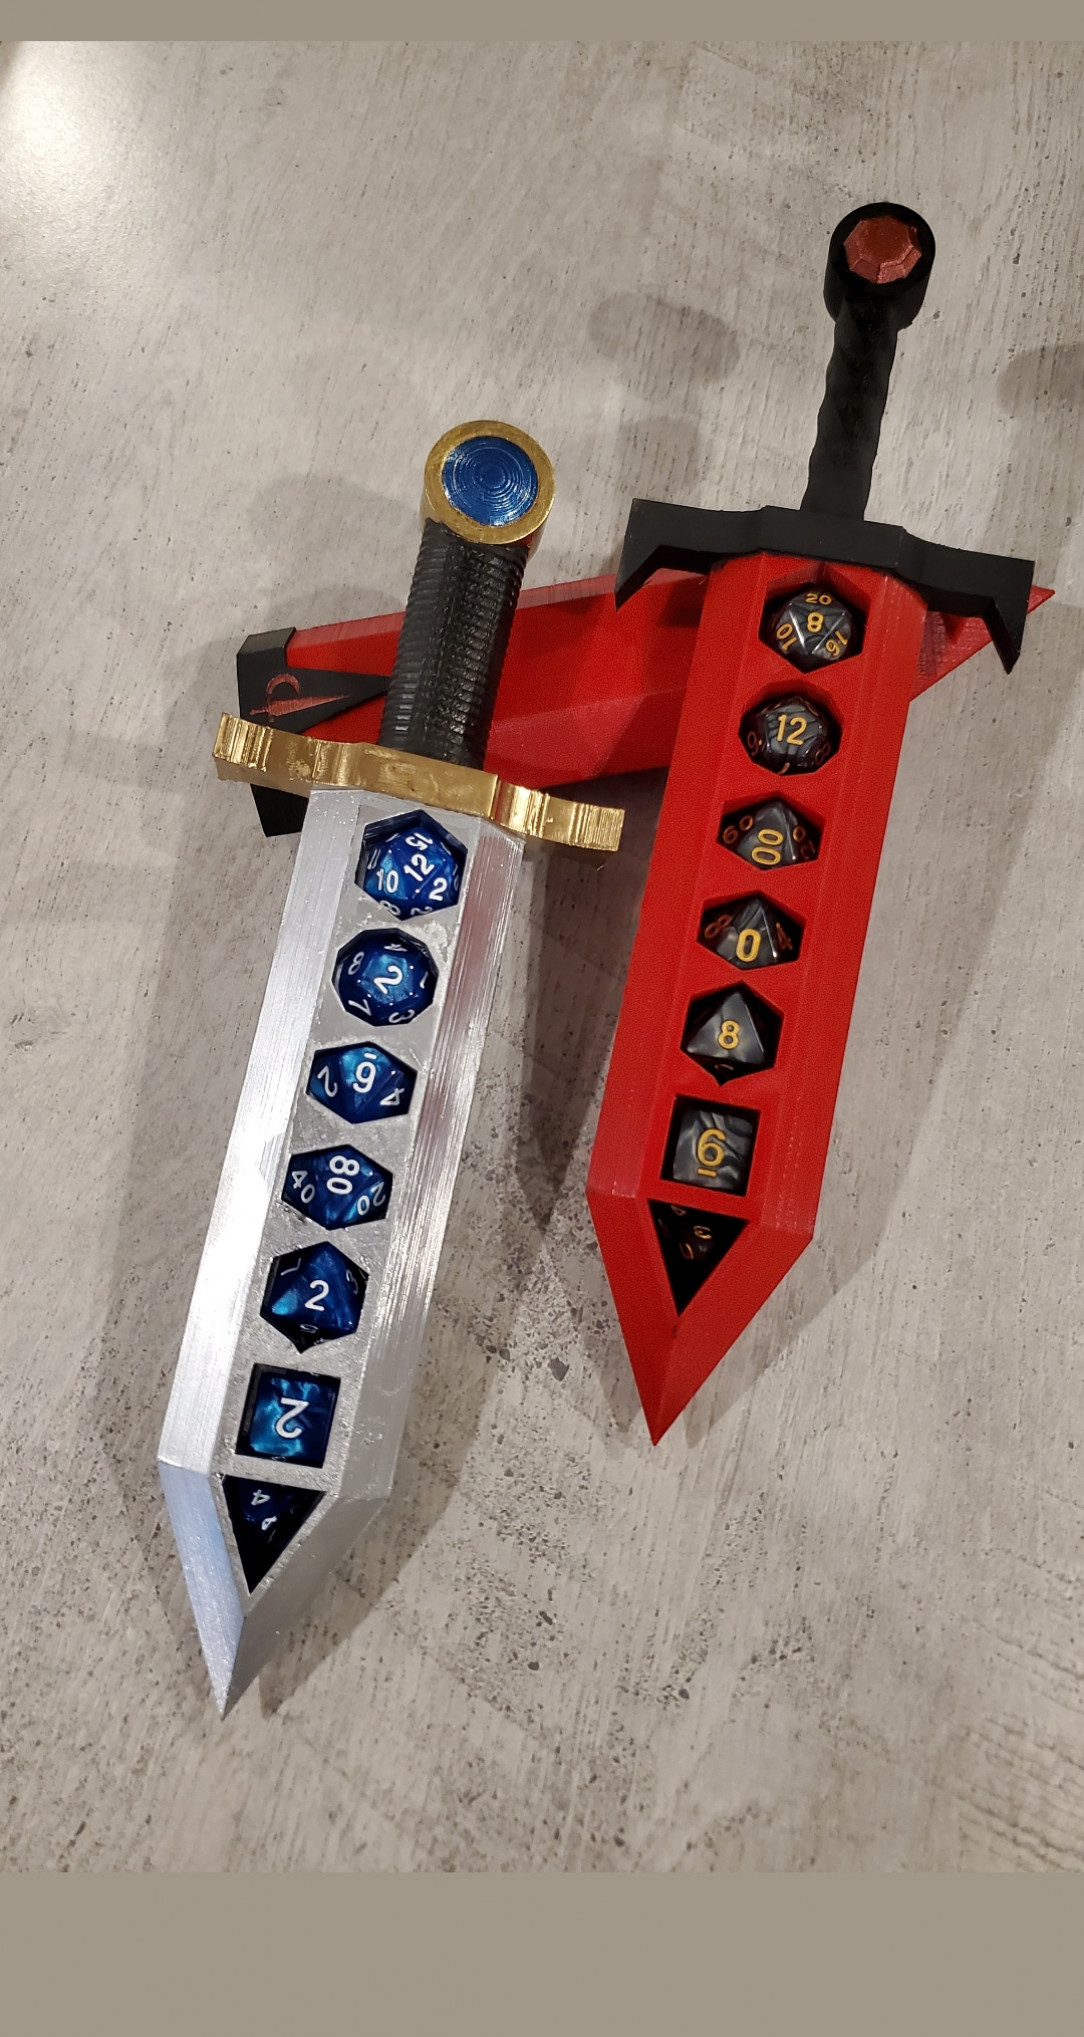 Dice Swords for DnD